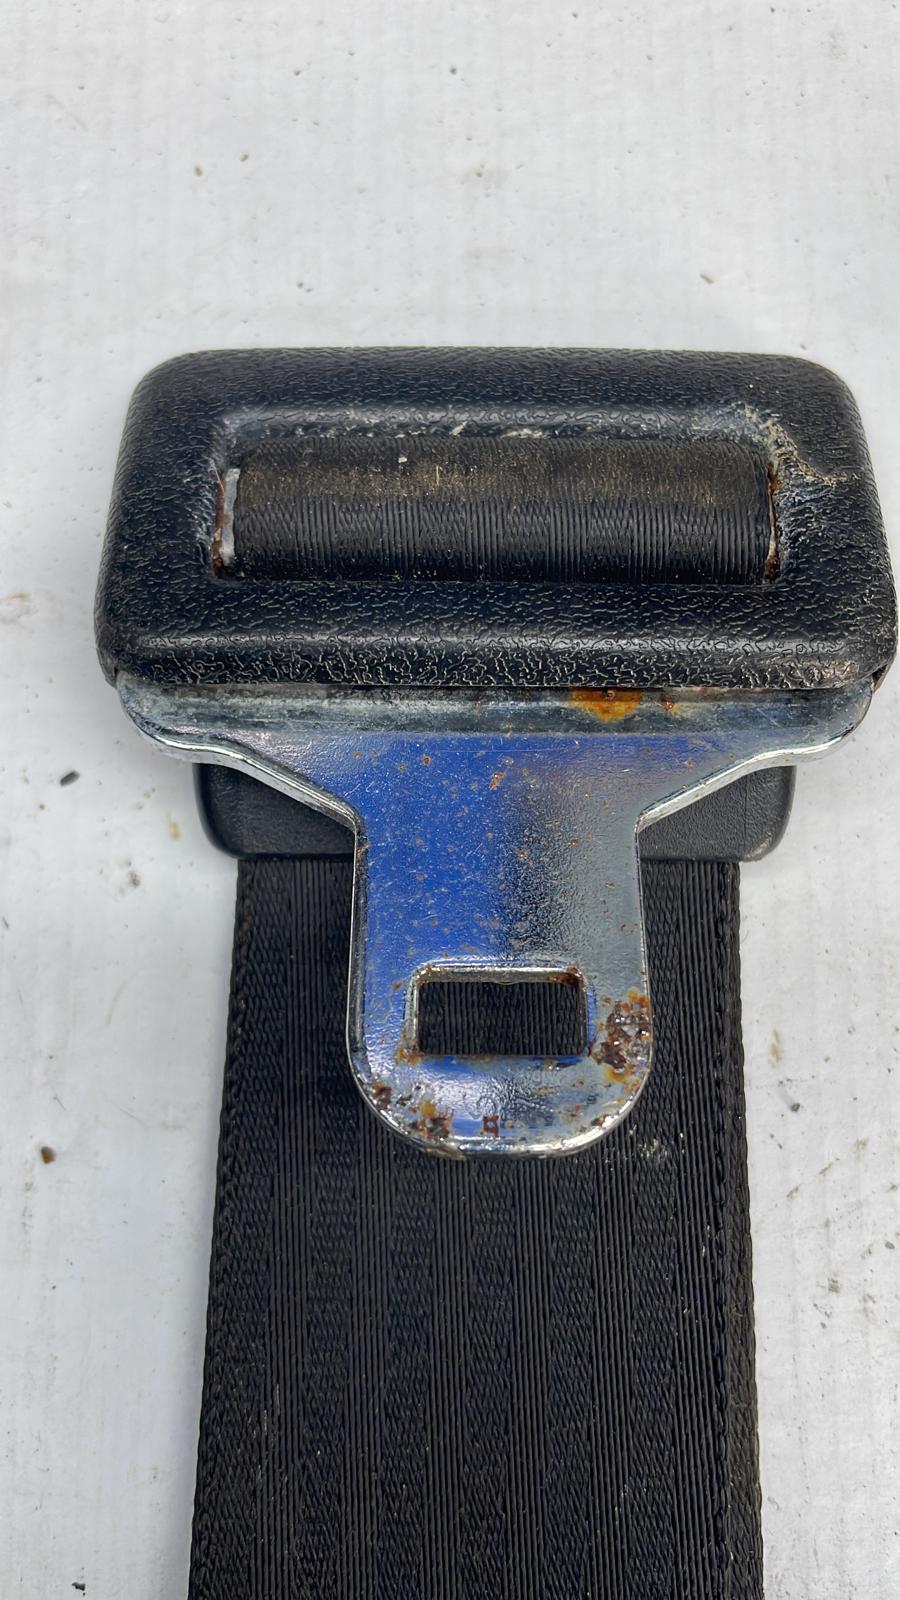 Used Porsche 924/944 rear 2 point static seat belt 001 477857795 used